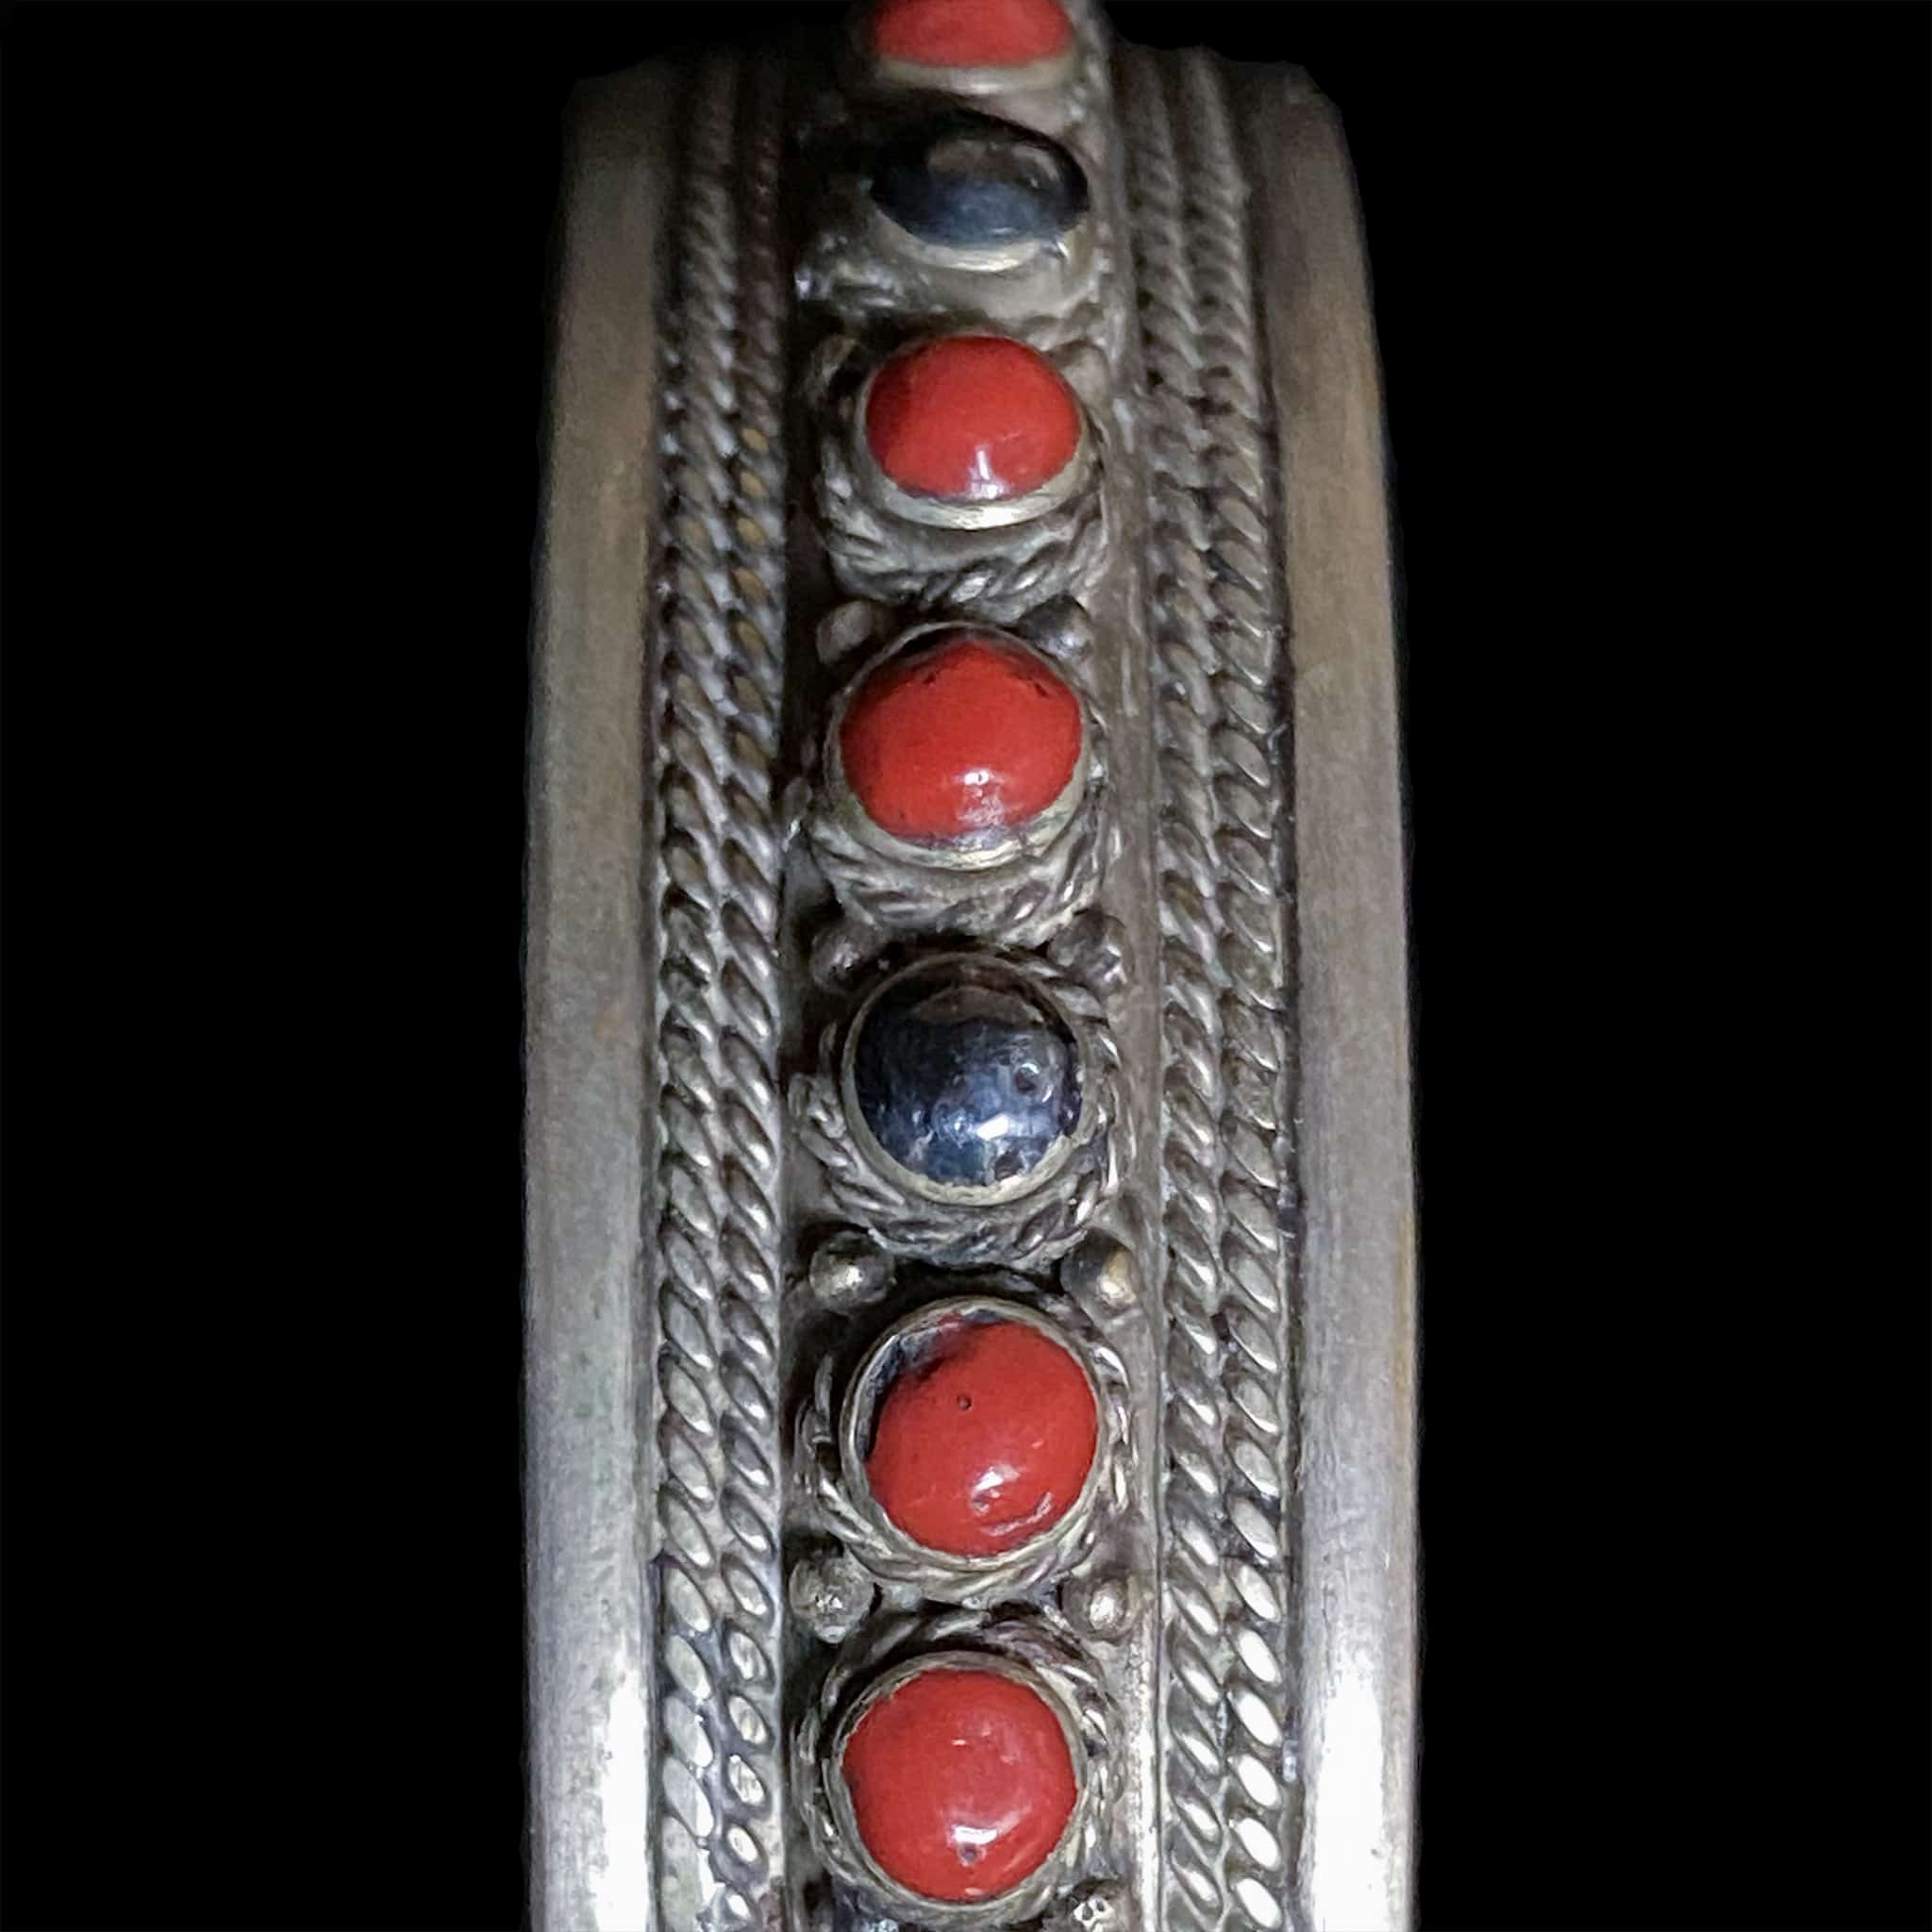 Vintage Moroccan Bangle with Coral and Onyx Decoration